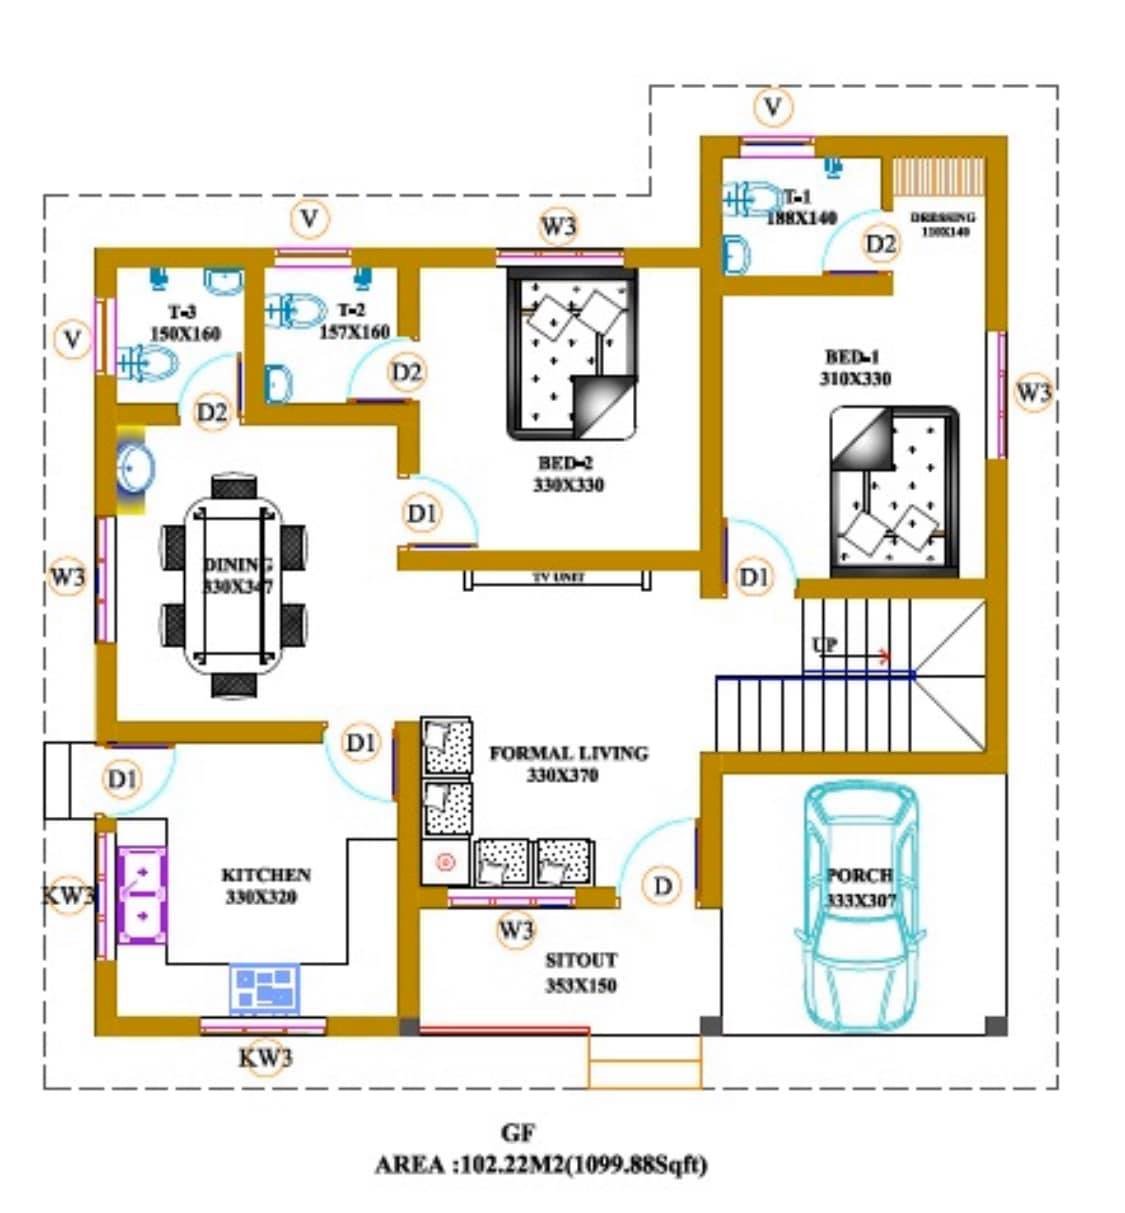 1601 Square Feet 3 Bedroom Contemporary Style House and Plan - Home ...